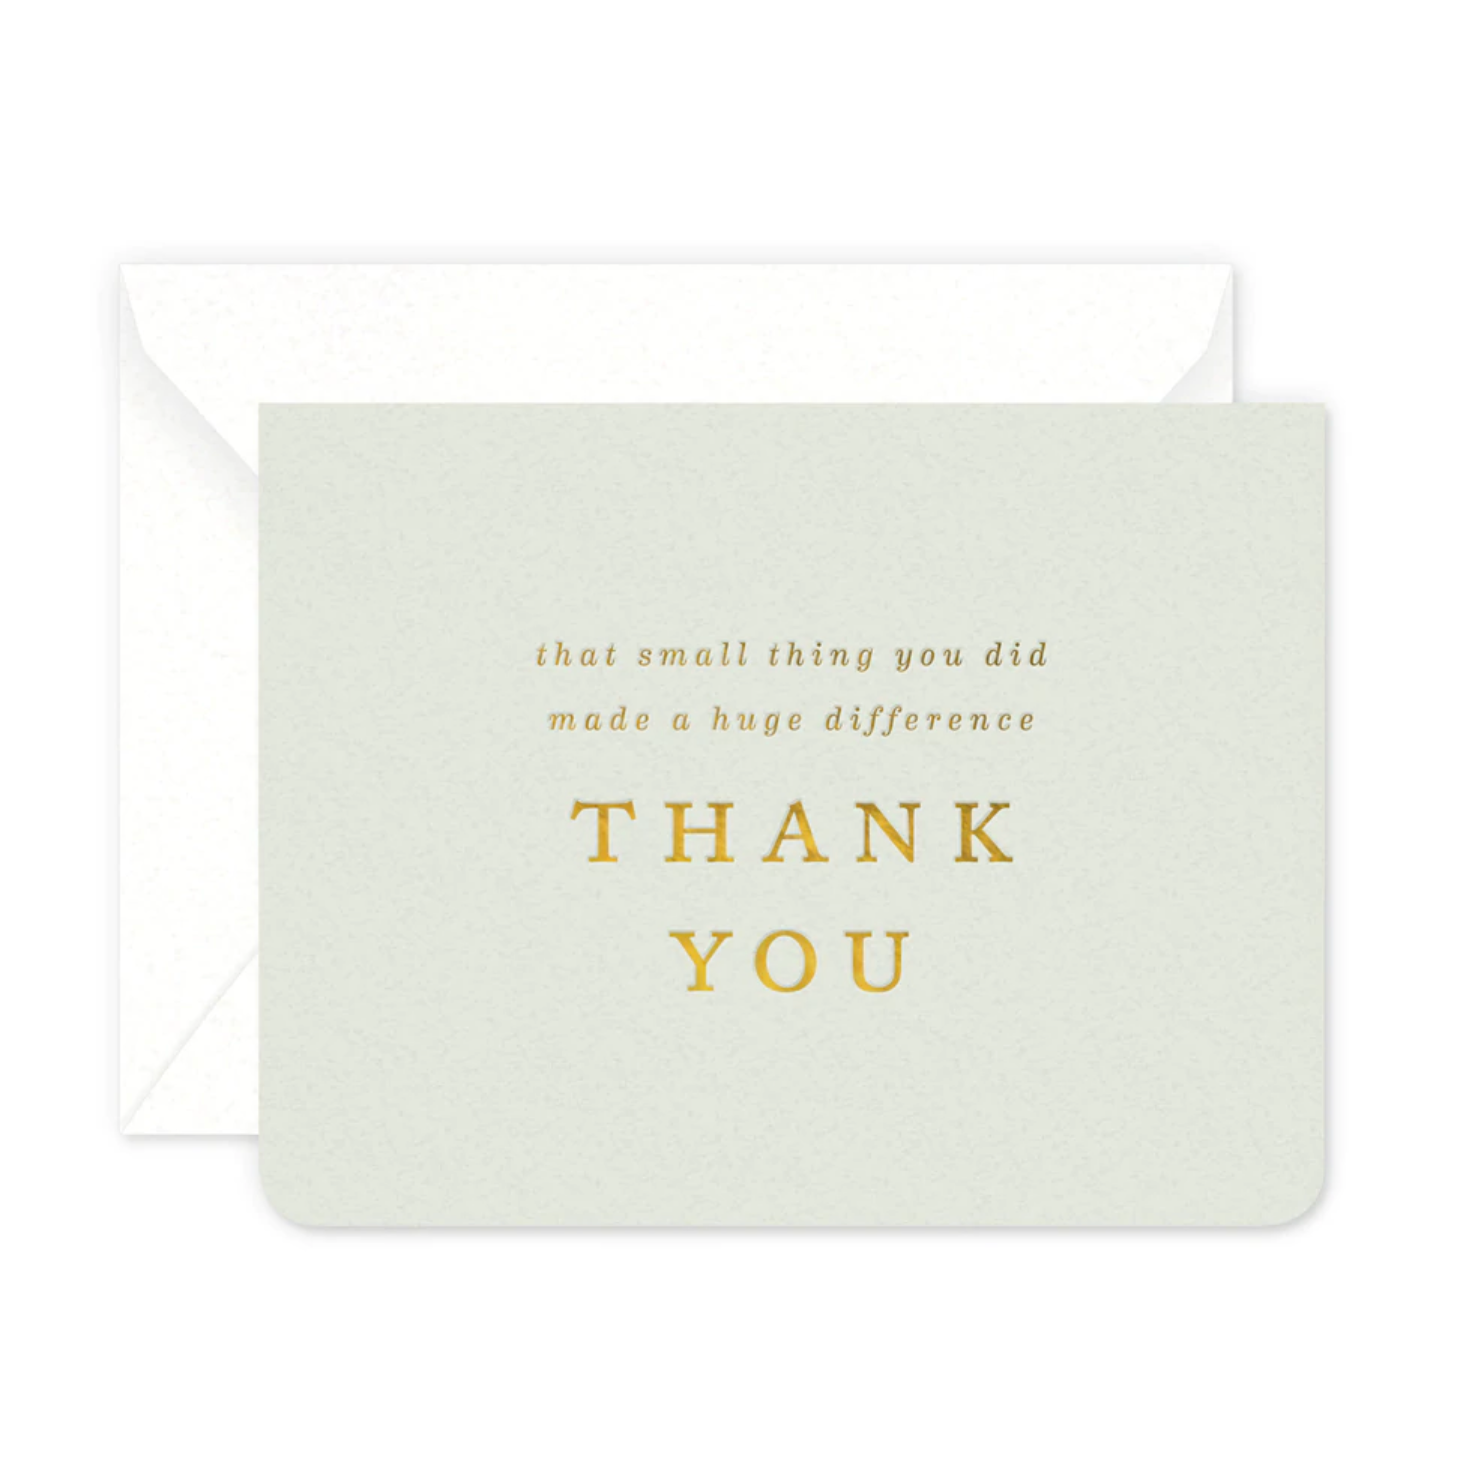 Small Things Thanks Cards (Boxed Set)